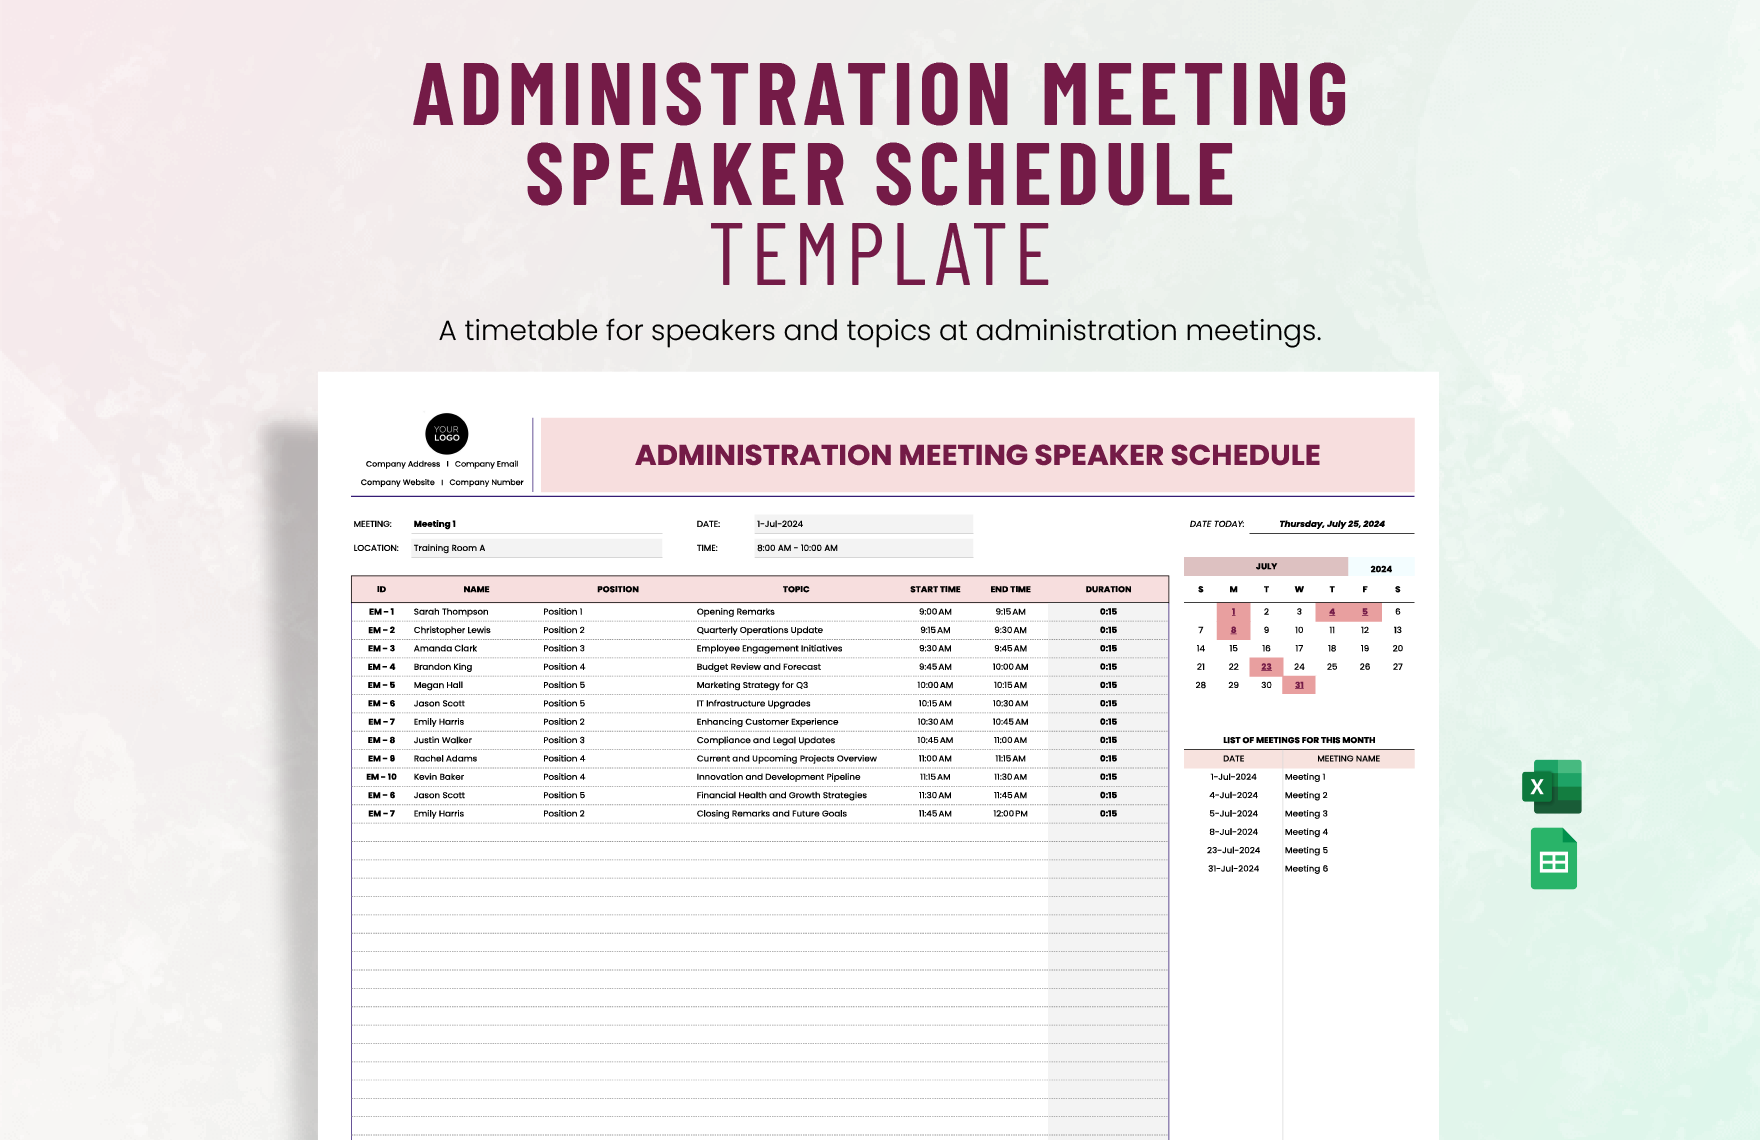 Administration Meeting Speaker Schedule Template in Excel, Google Sheets